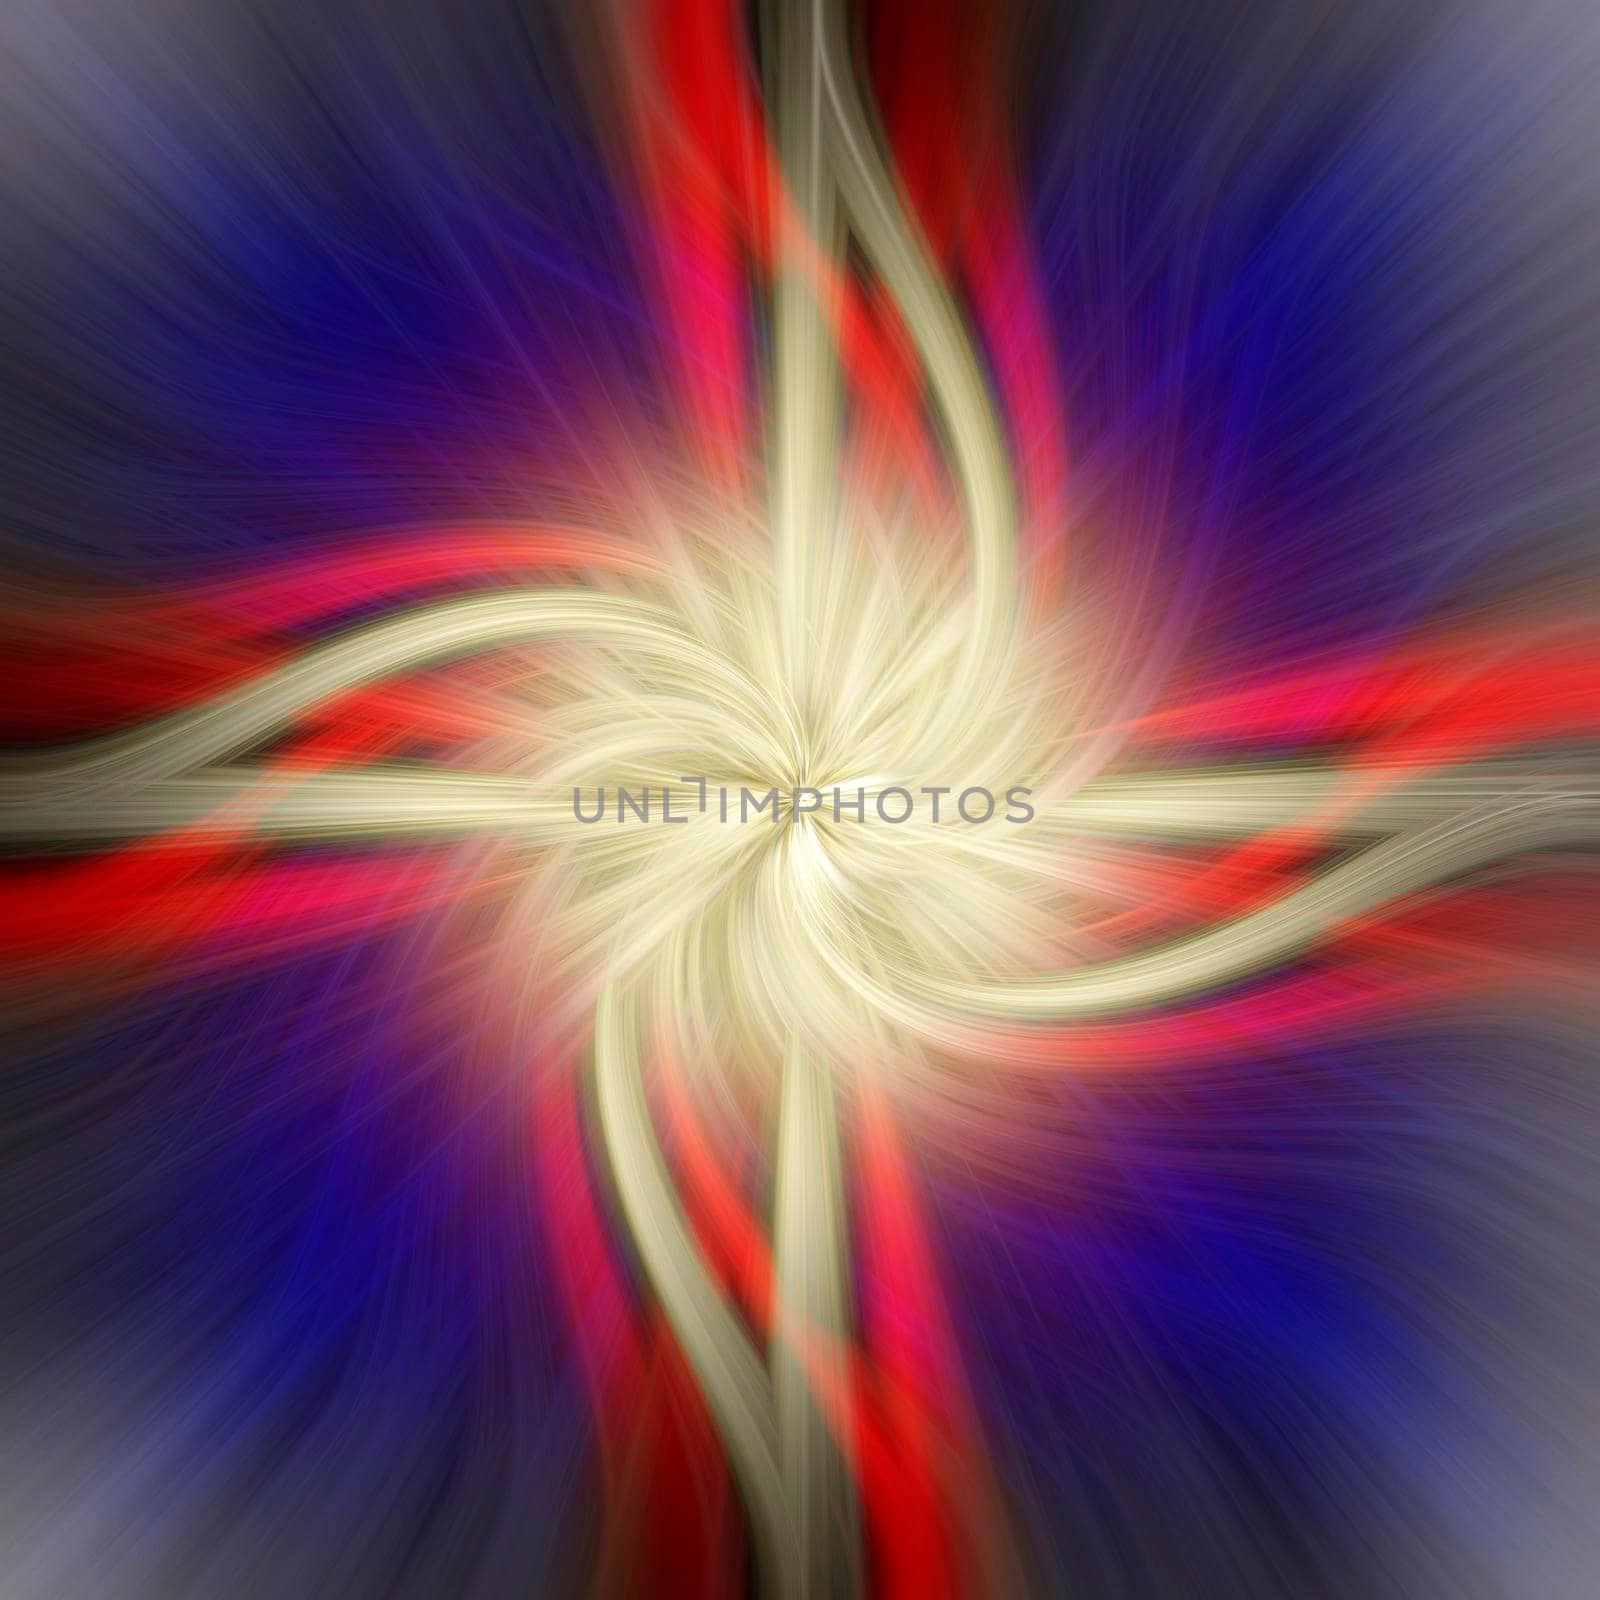 Red, white, blue and grey lines pattern with fibers effect. Abstract fantasy background